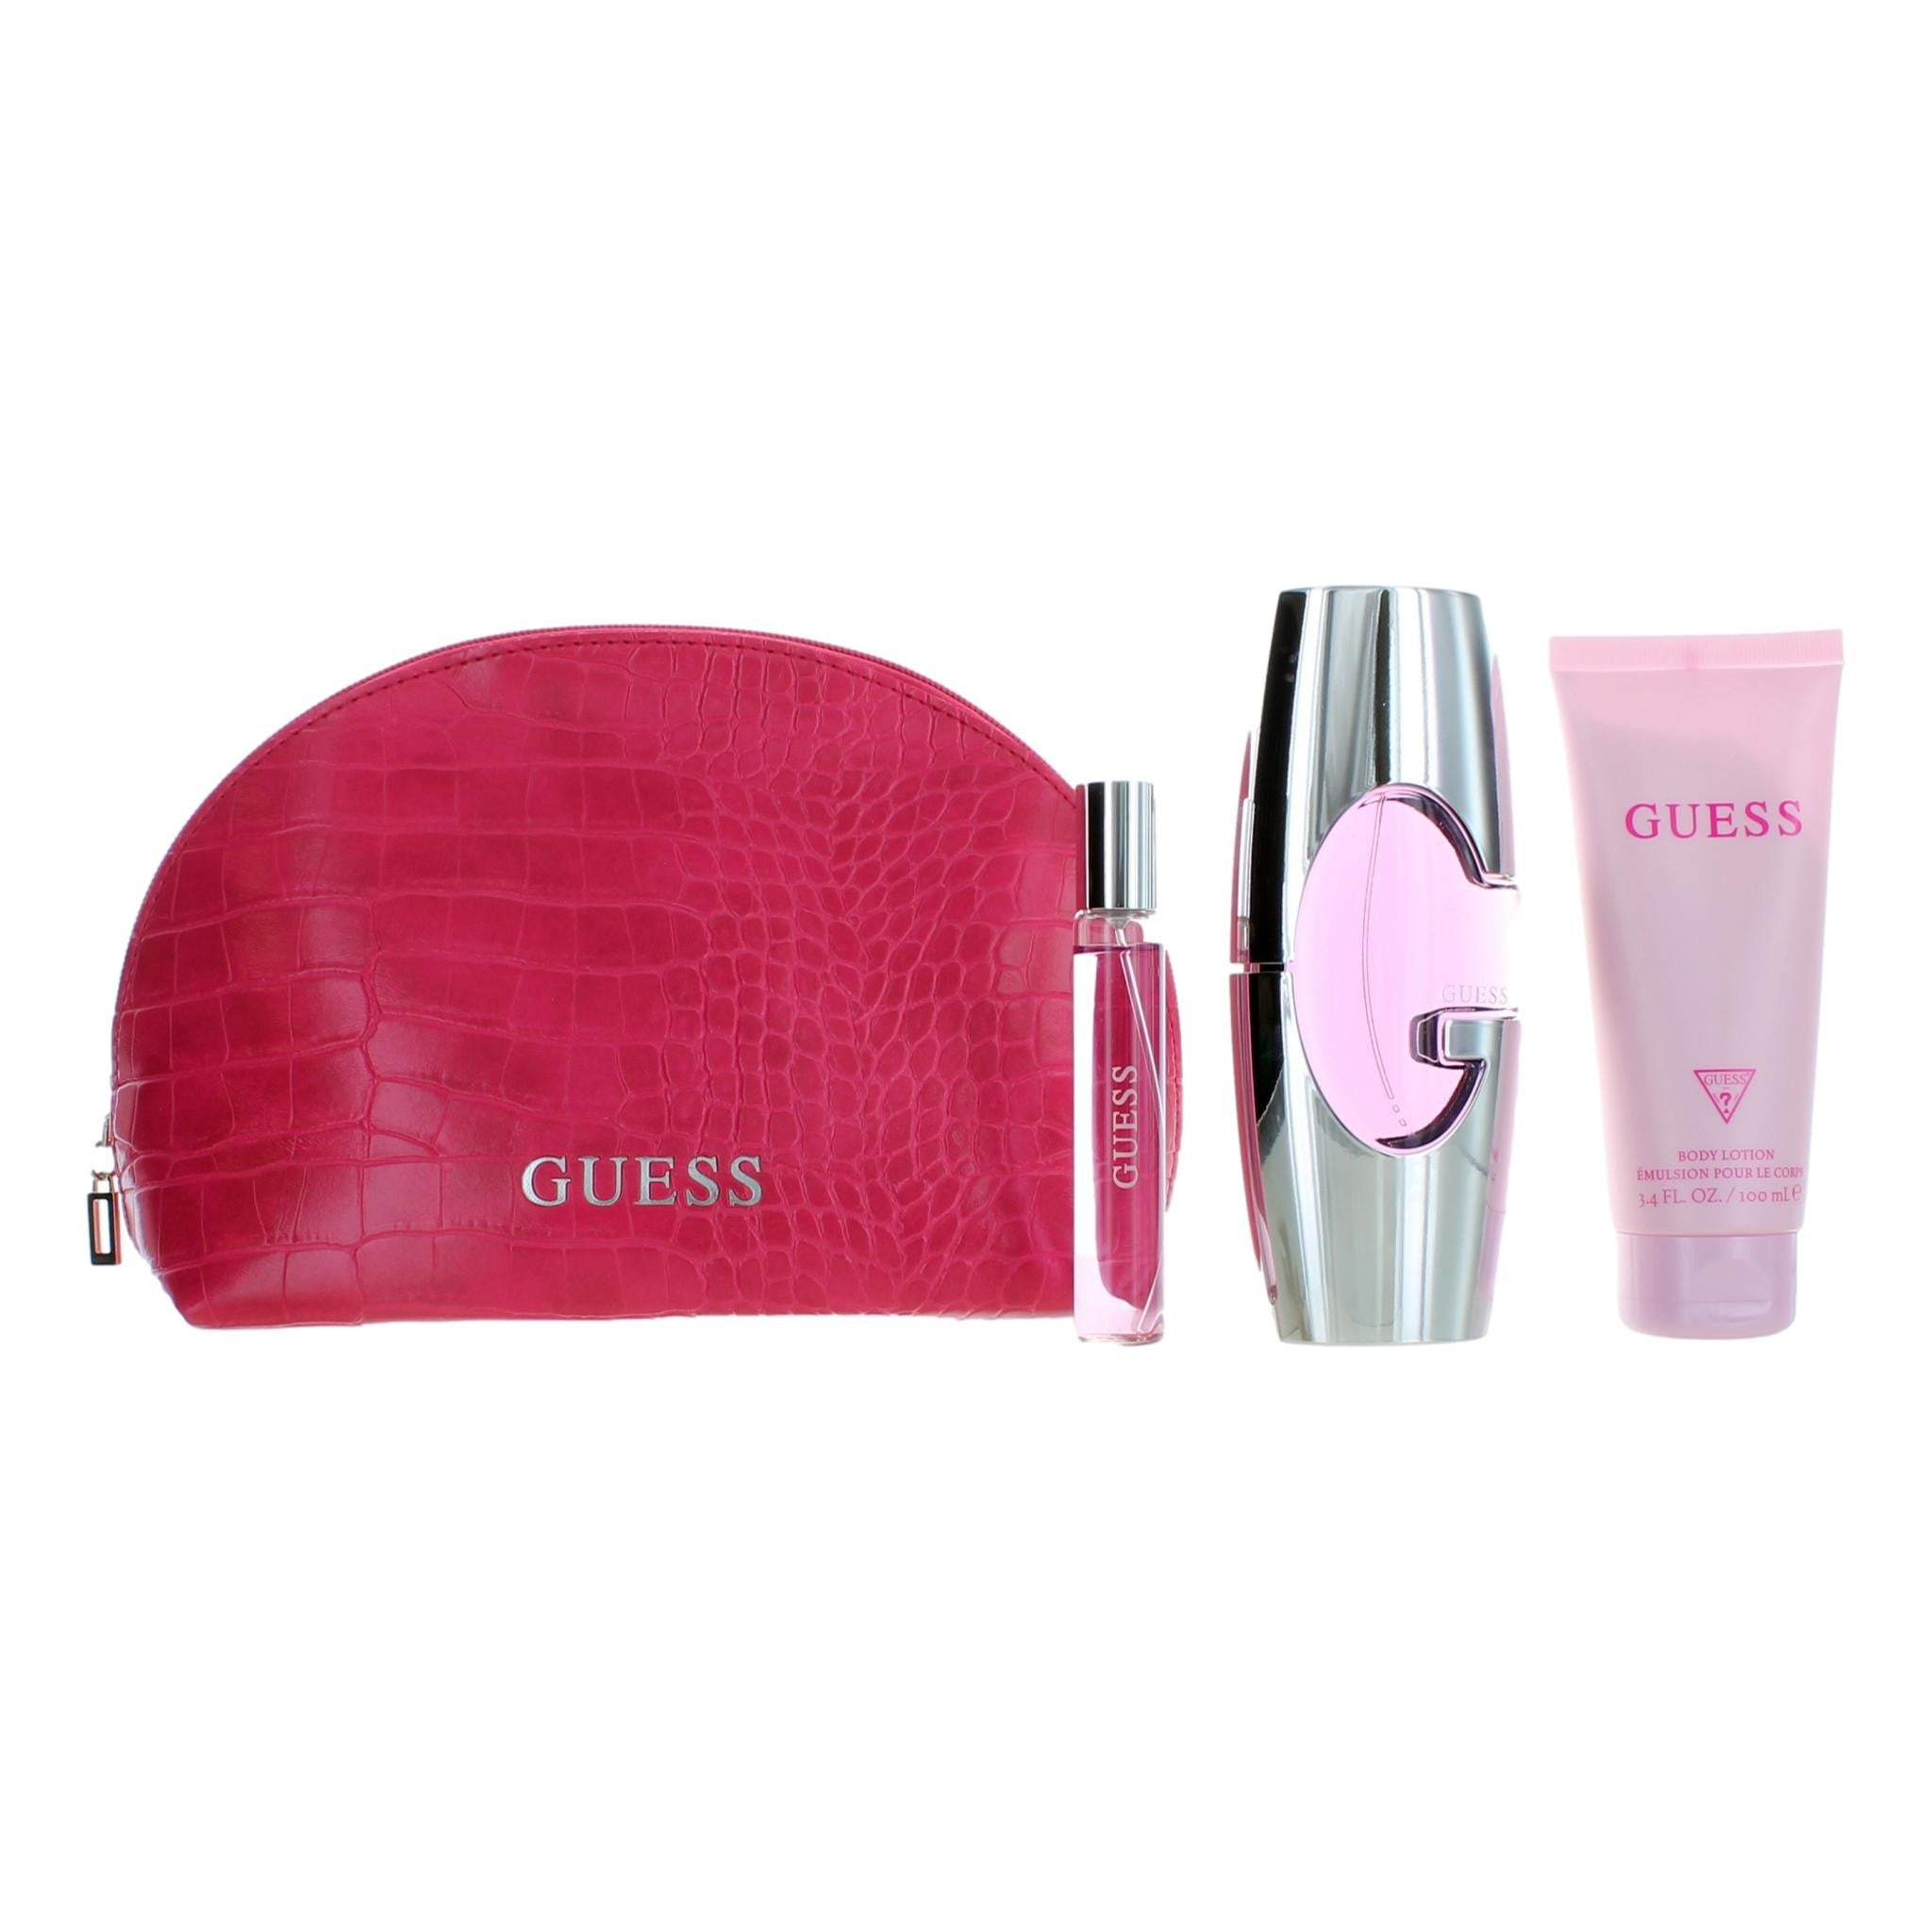 Bottle of Guess by Parlux, 4 Piece Gift Set for Women with Pouch